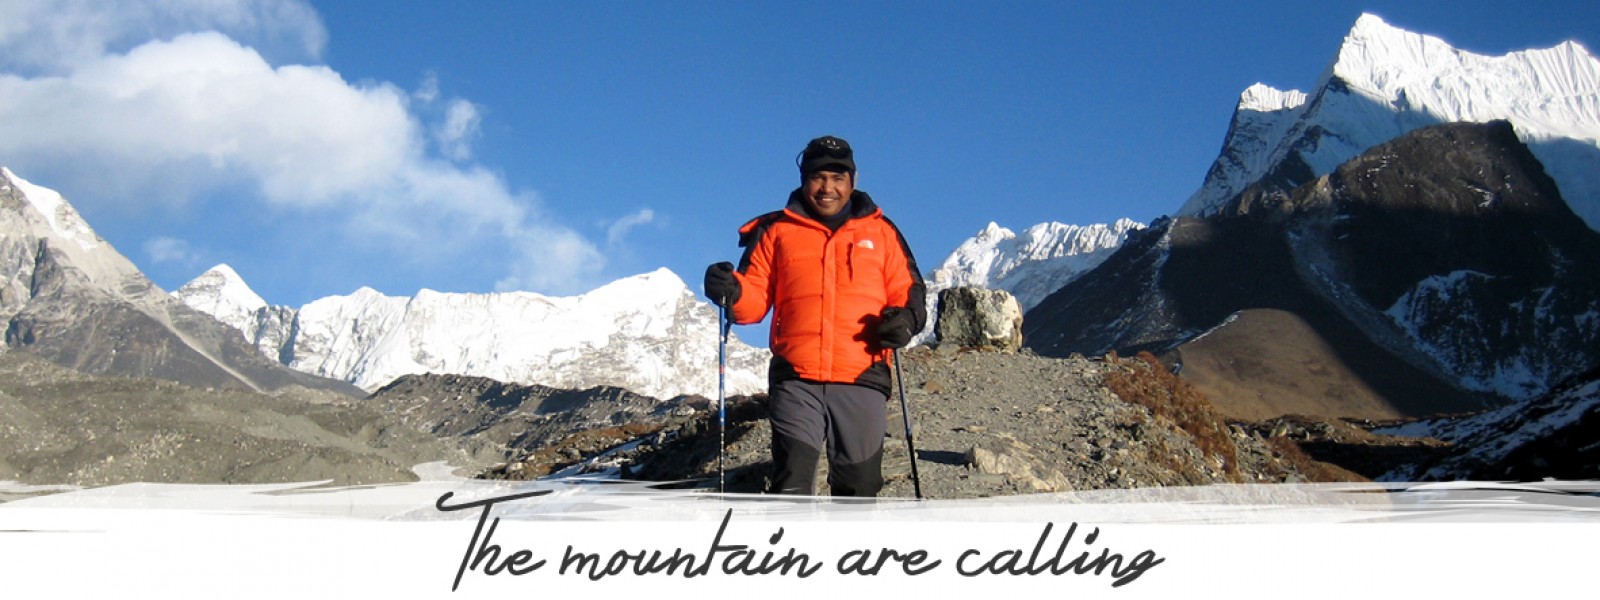 Tour, Trekking, Peak Climbing and Expedition specialist